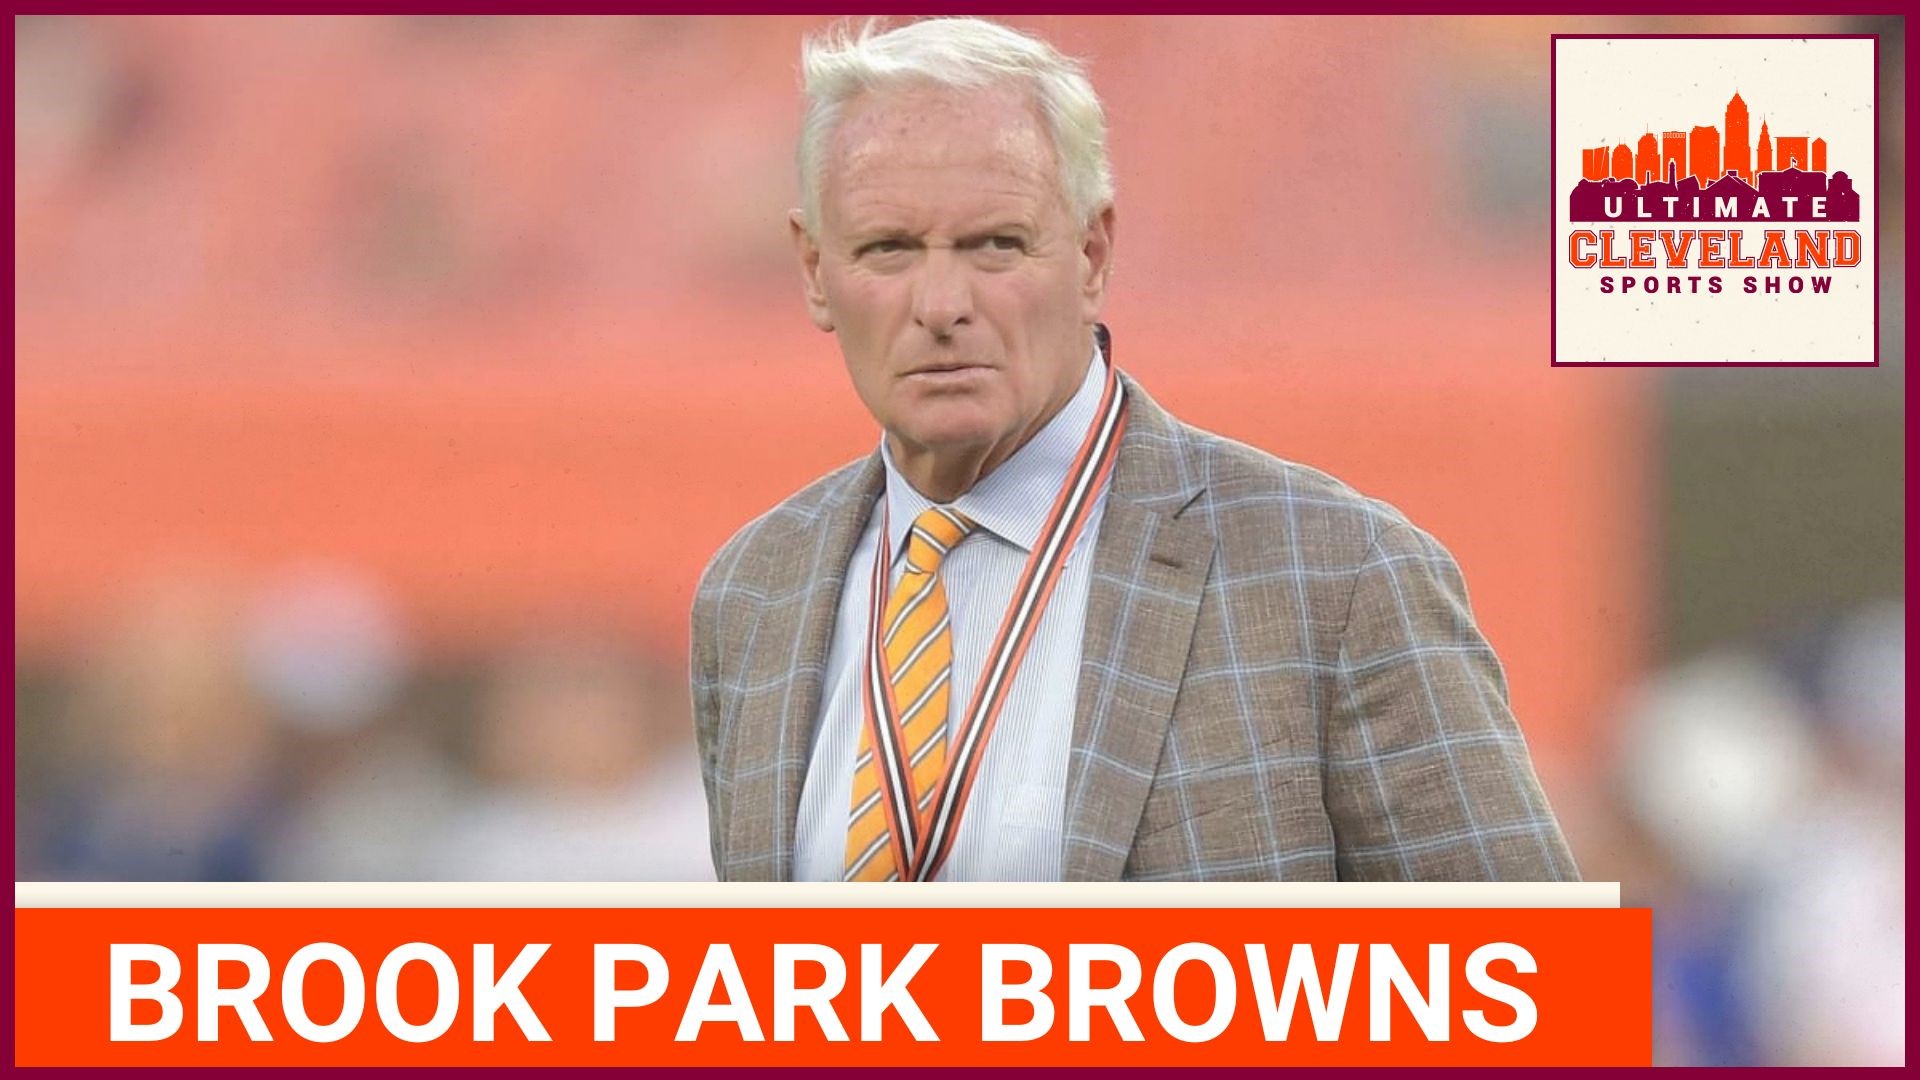 If Jimmy Haslam decides to build a new stadium in Brook Park, would he rename the team? Update the Cleveland Browns logos or colors? Or leave everything as is